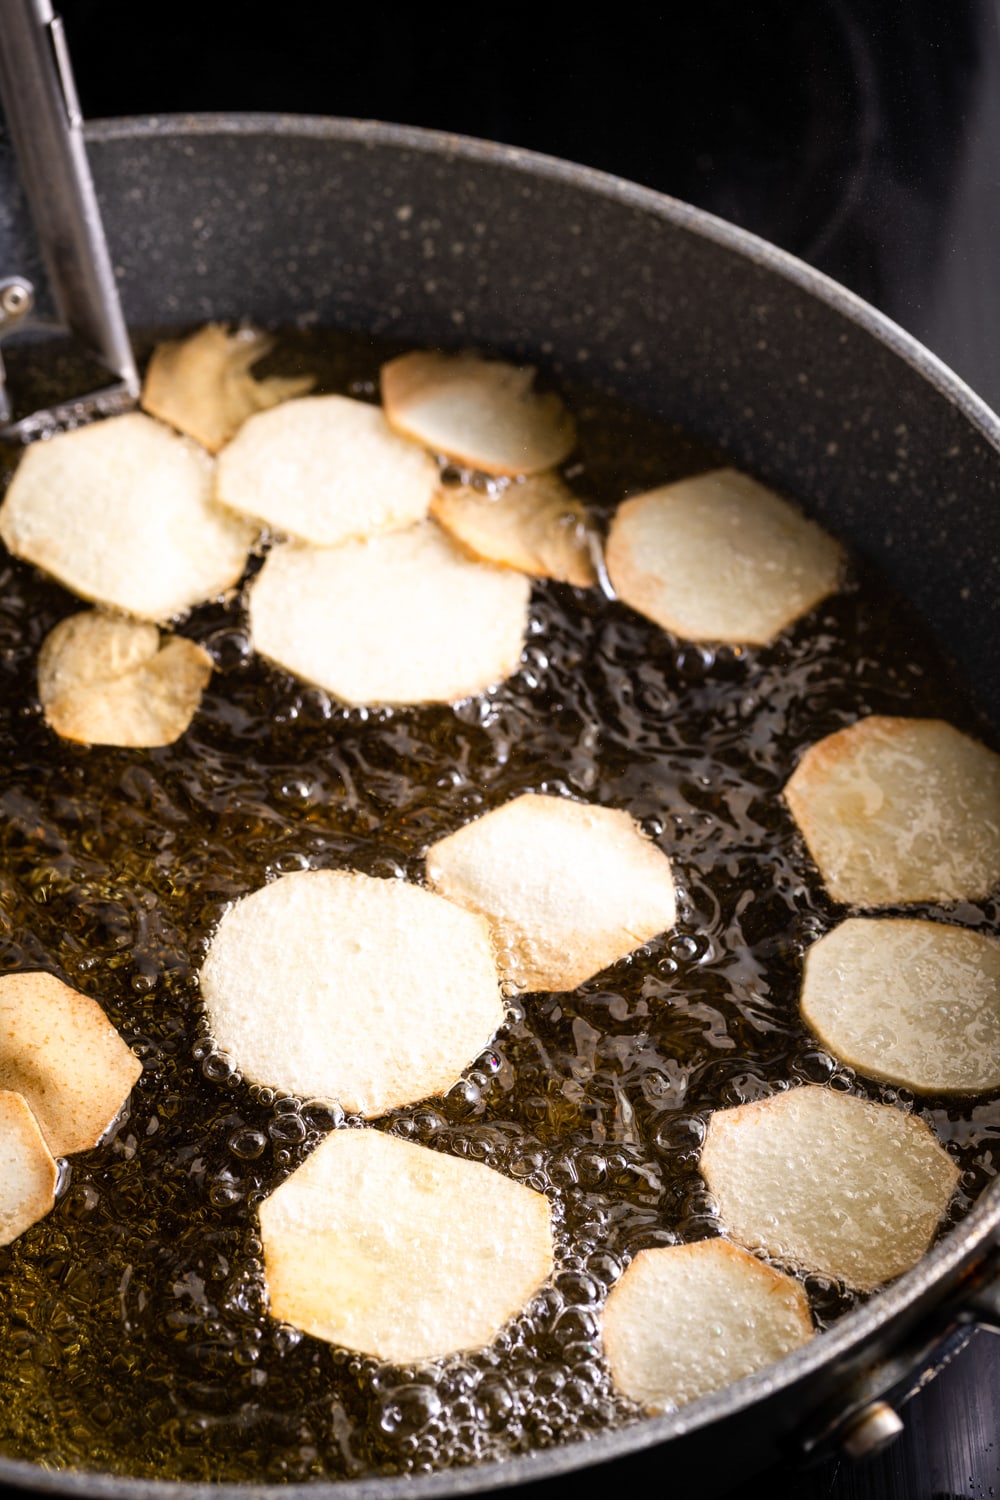 slices of malanga being fried in oil in a Dutch oven